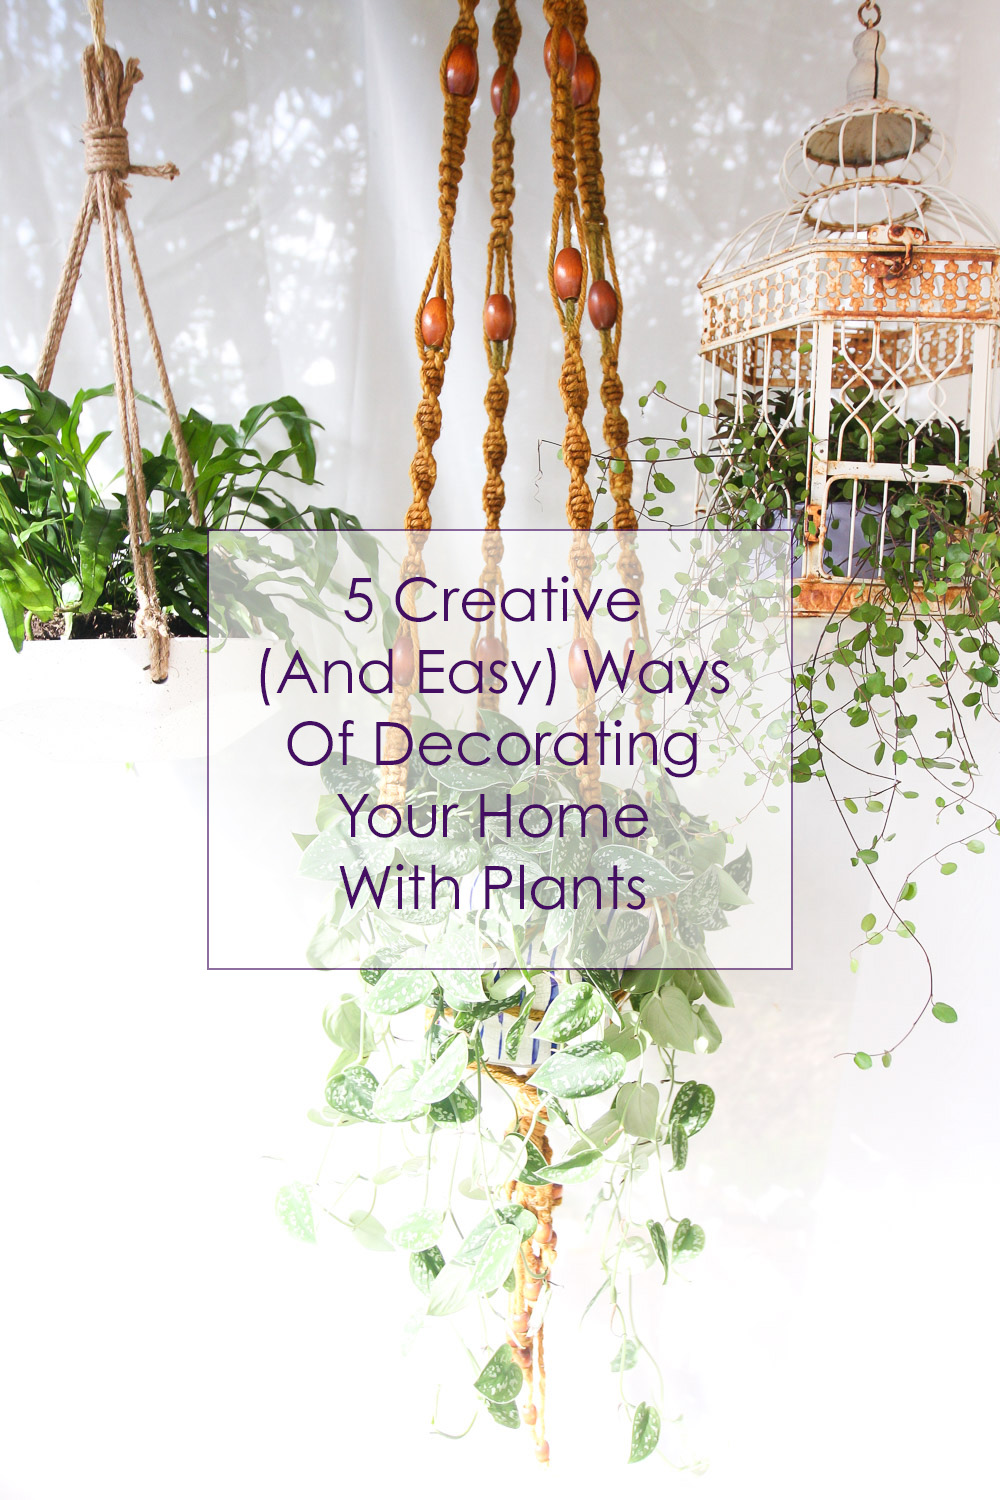  5 Creative (And Easy) Ways Of Decorating Your Home With Plants